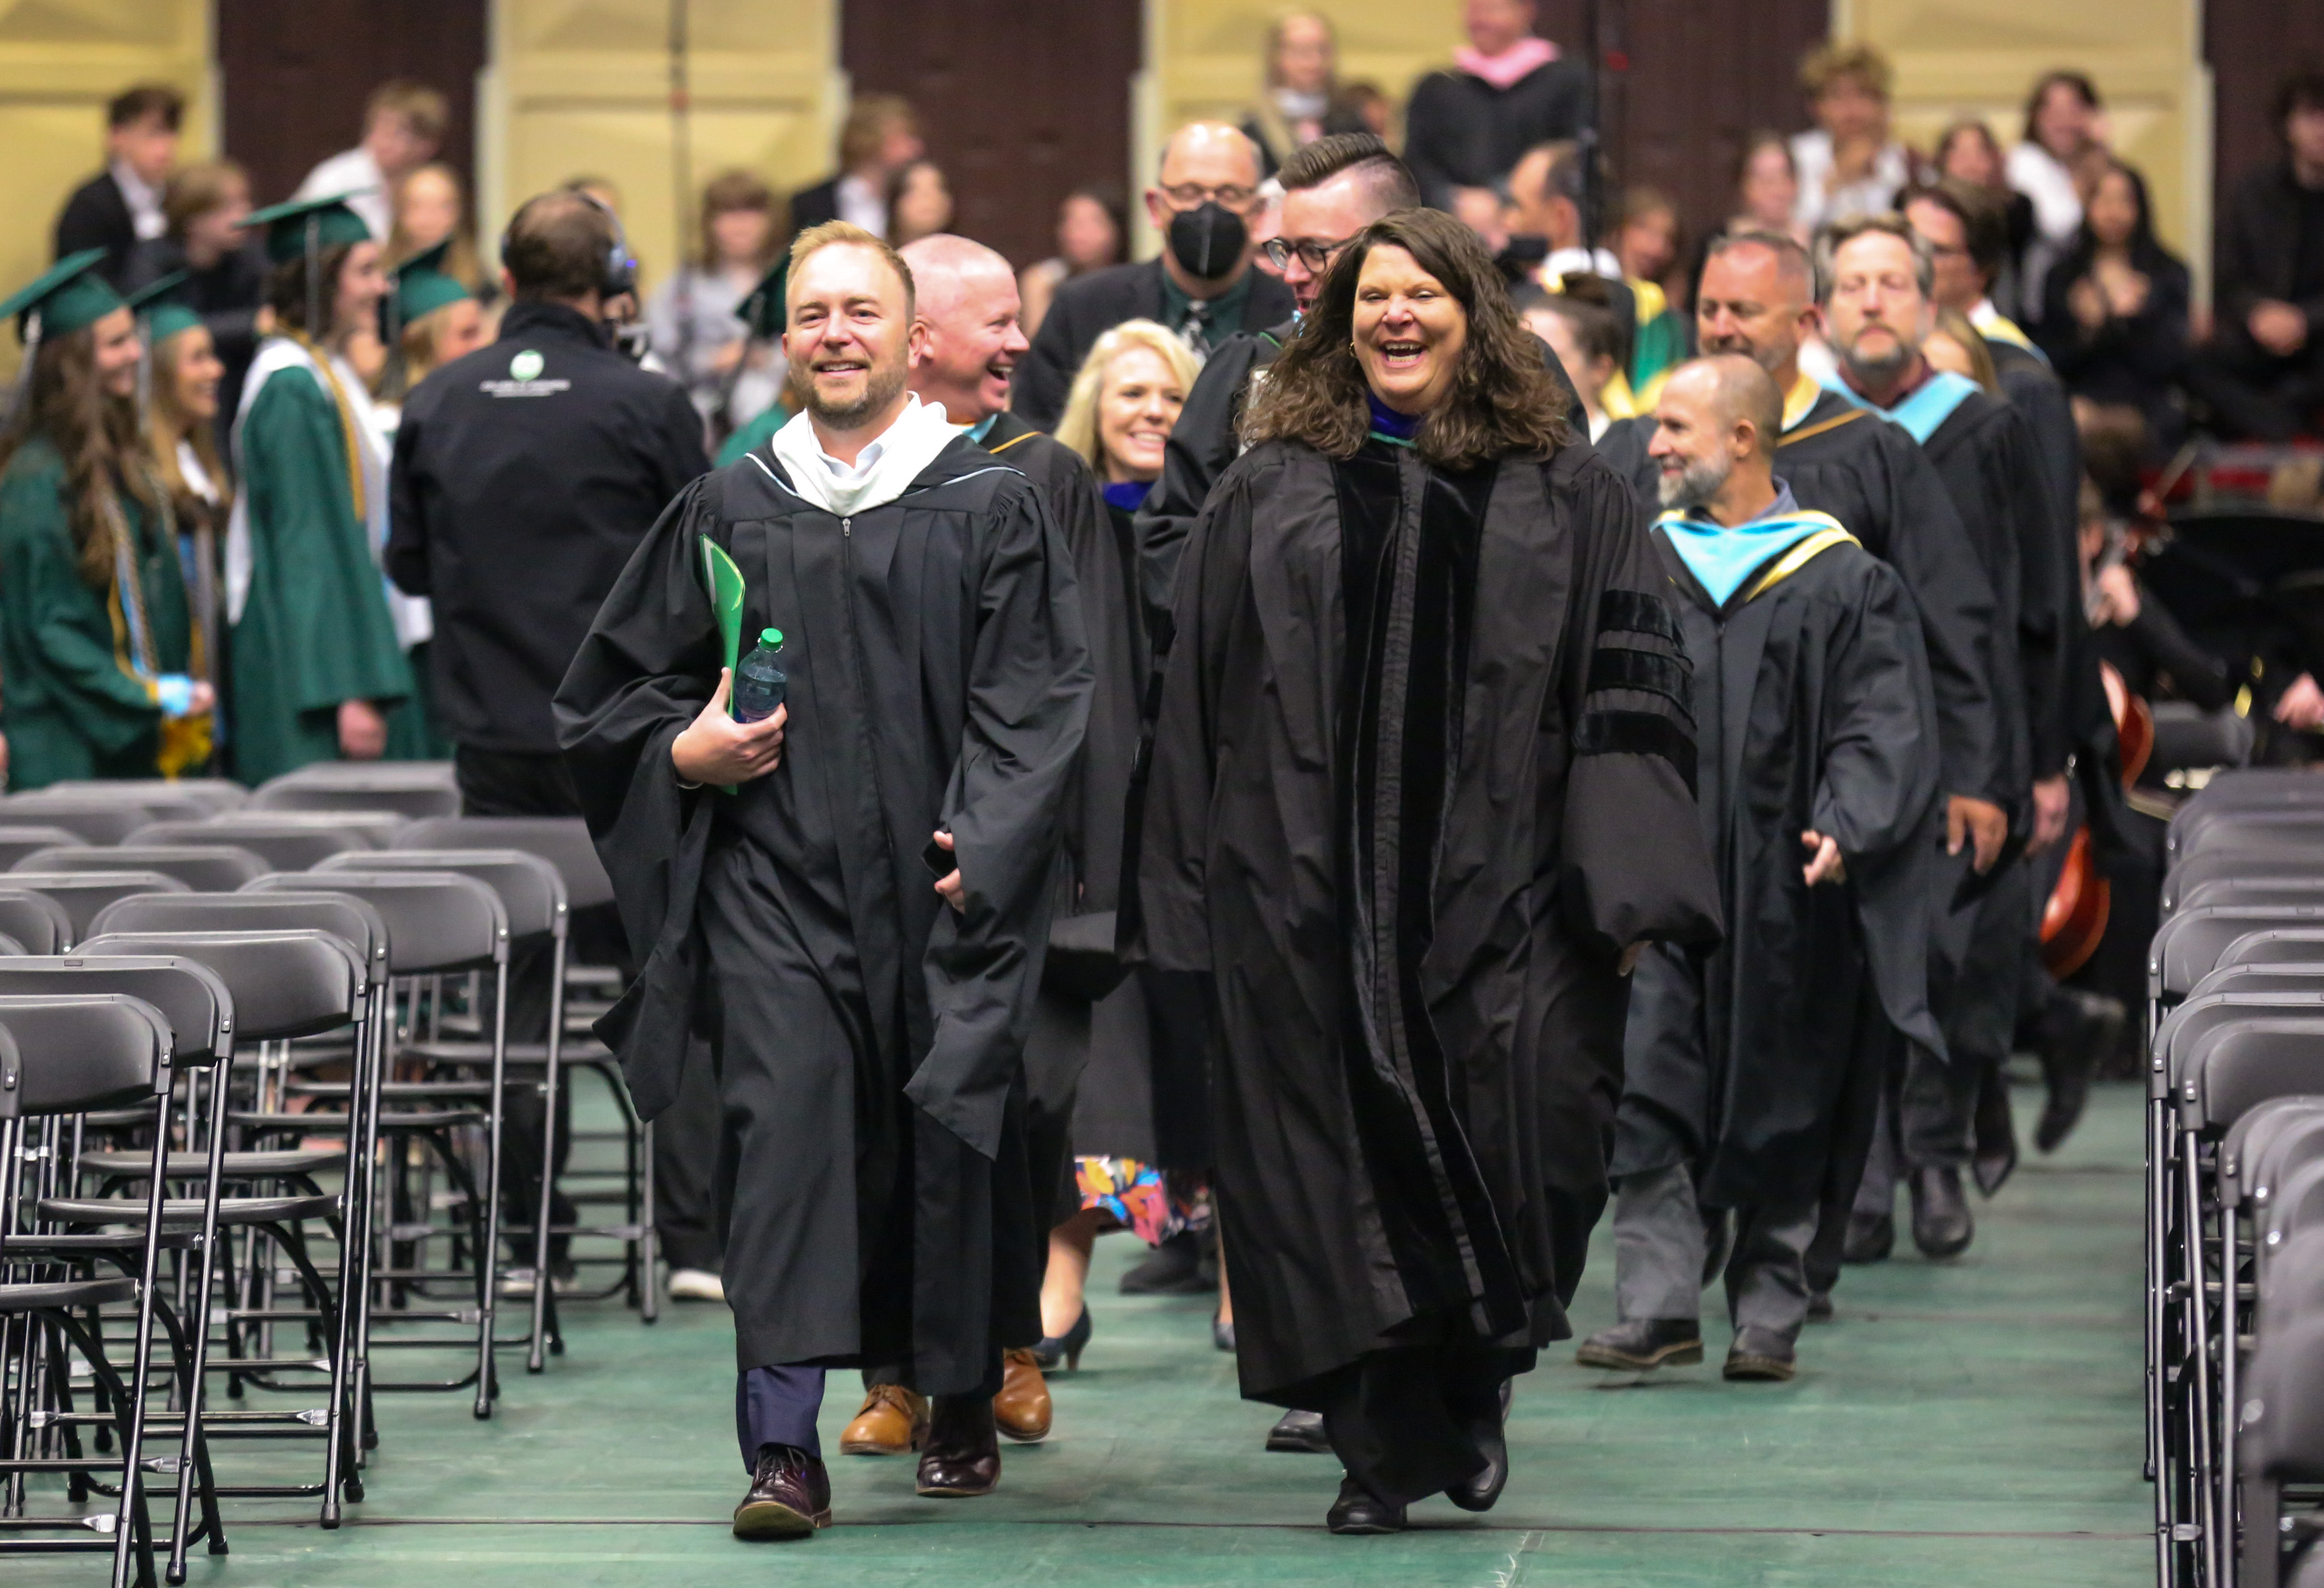 Superintendent Kingsley and Fossil Ridge High School principal lead the walk into Moby Arena.